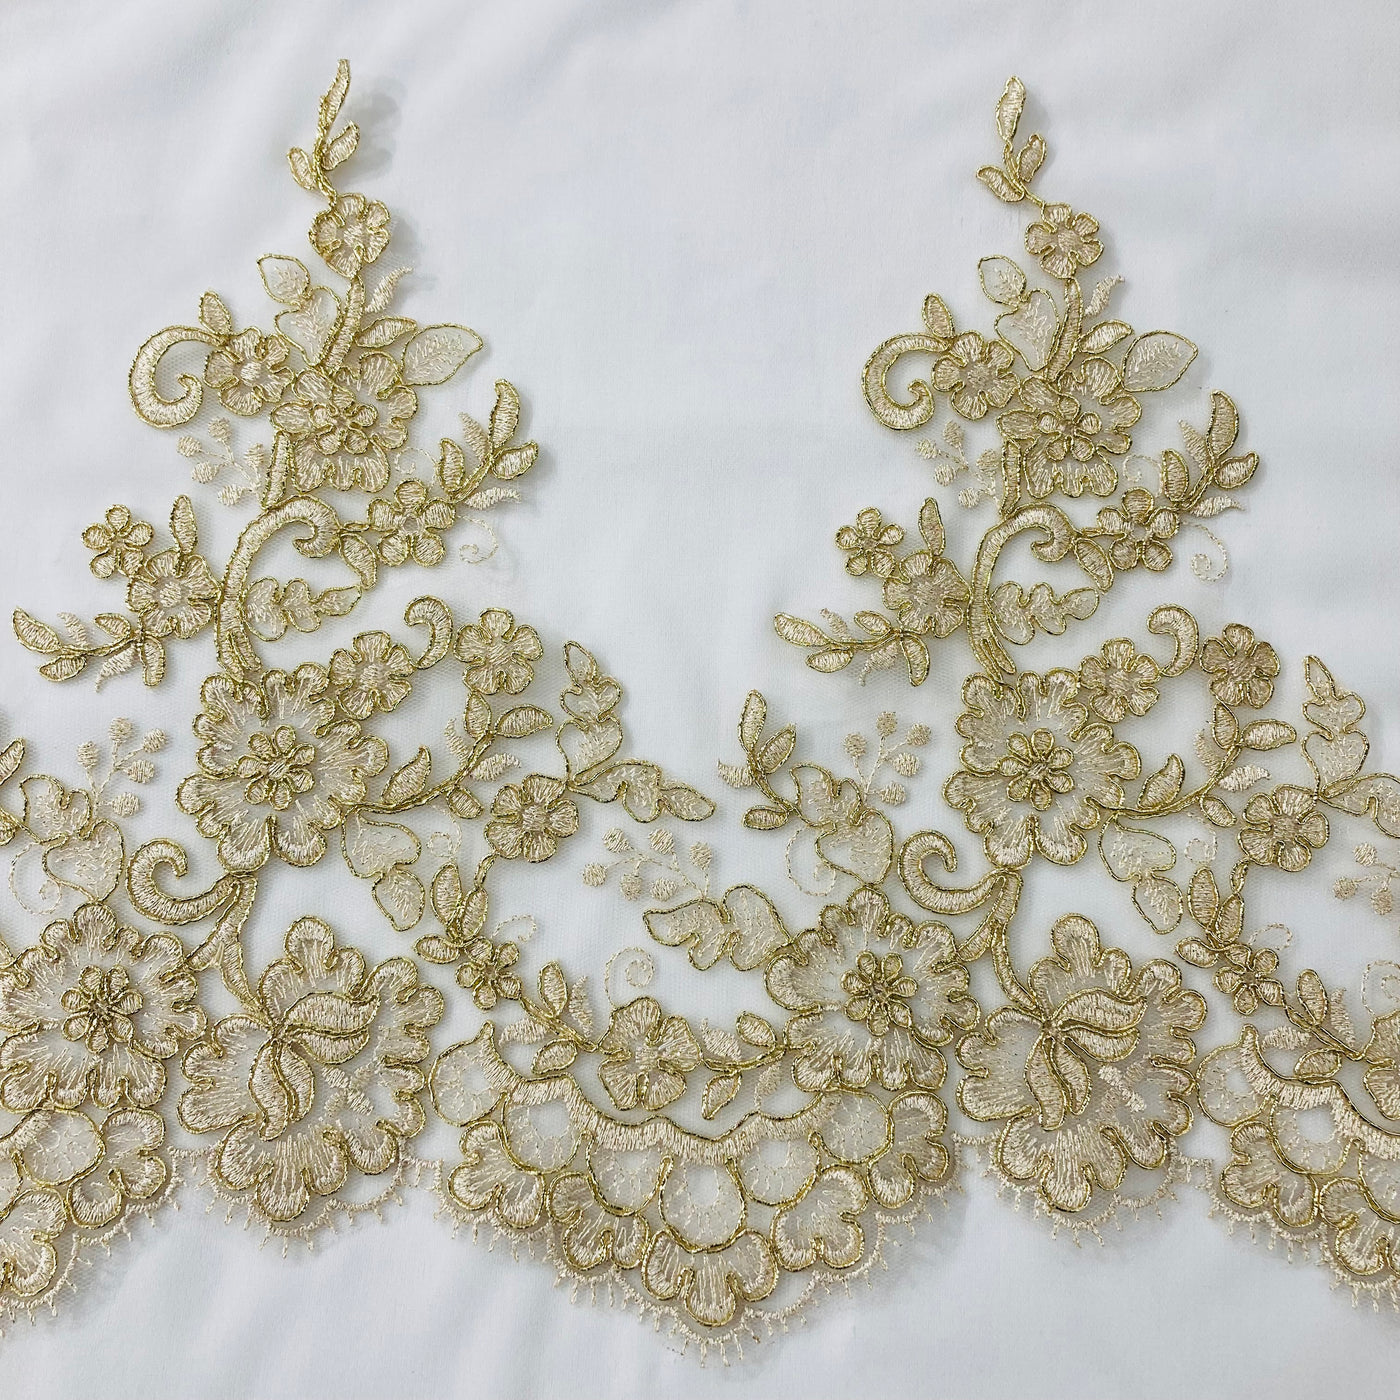 Corded Lace Trimming Embroidered on 100% Polyester Net Mesh. Lace USA